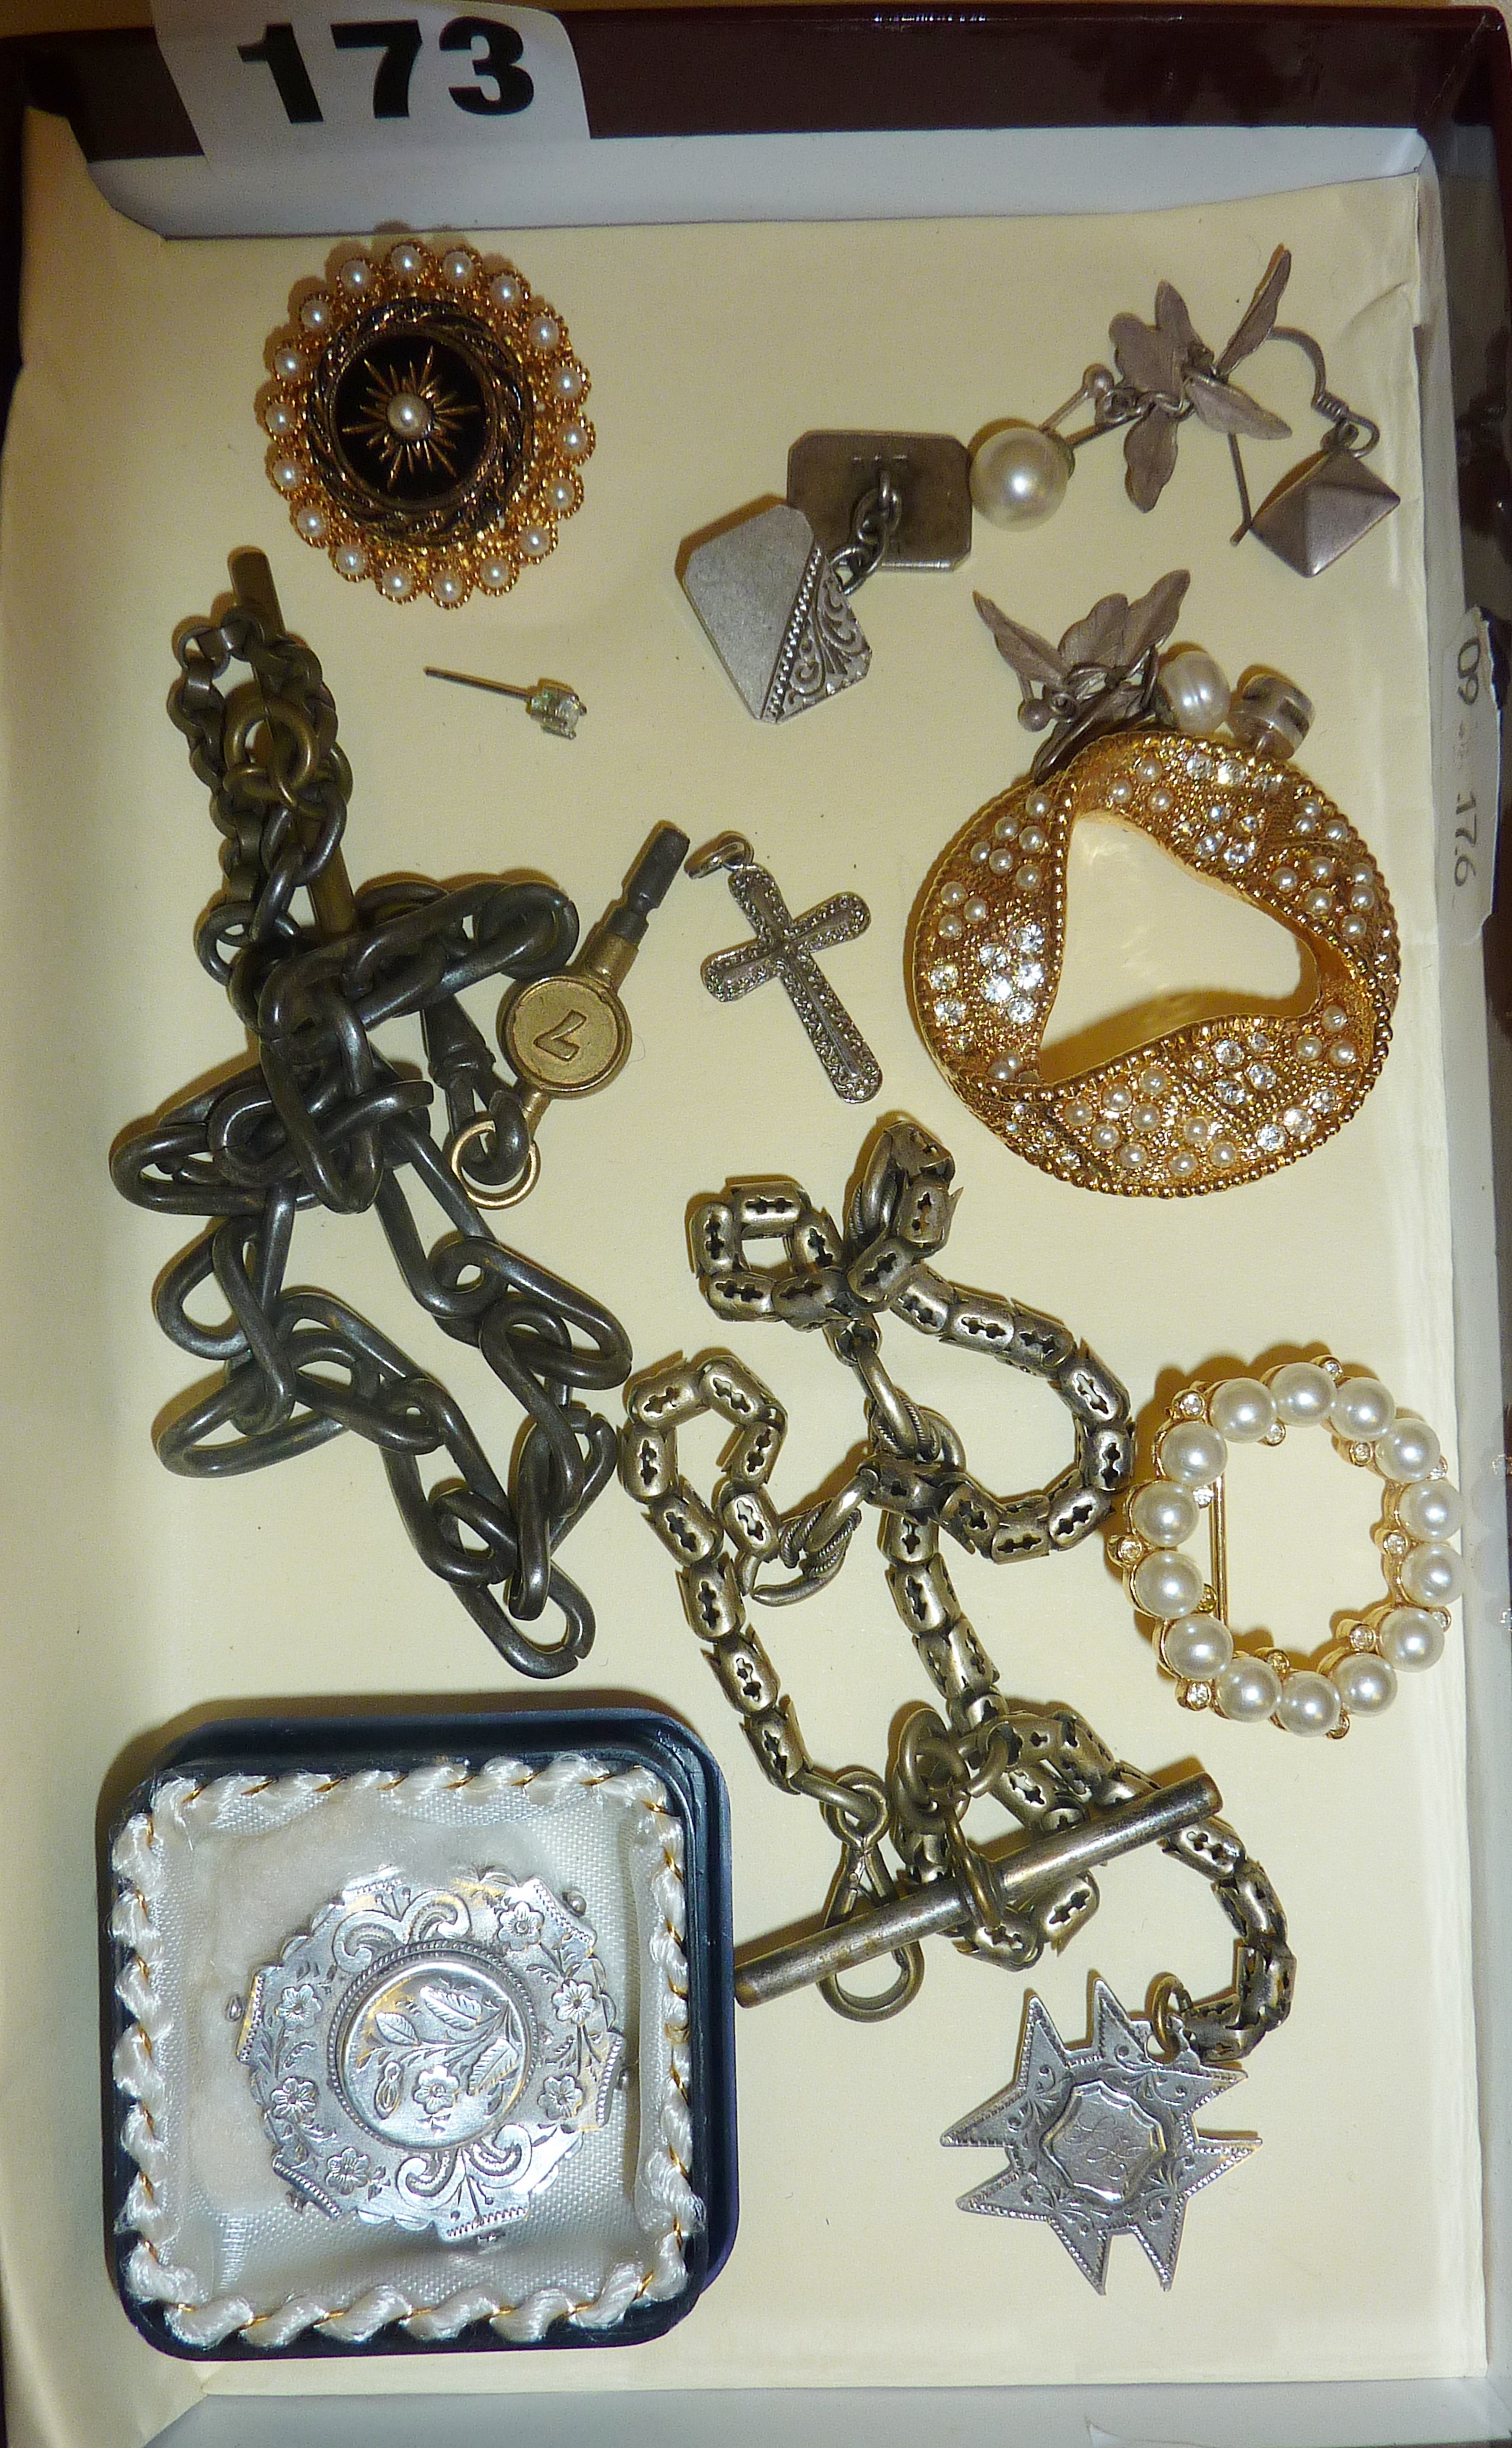 Antique fob watch chain, silver fob medal, antique and vintage jewellery brooches, earrings etc - Image 3 of 3